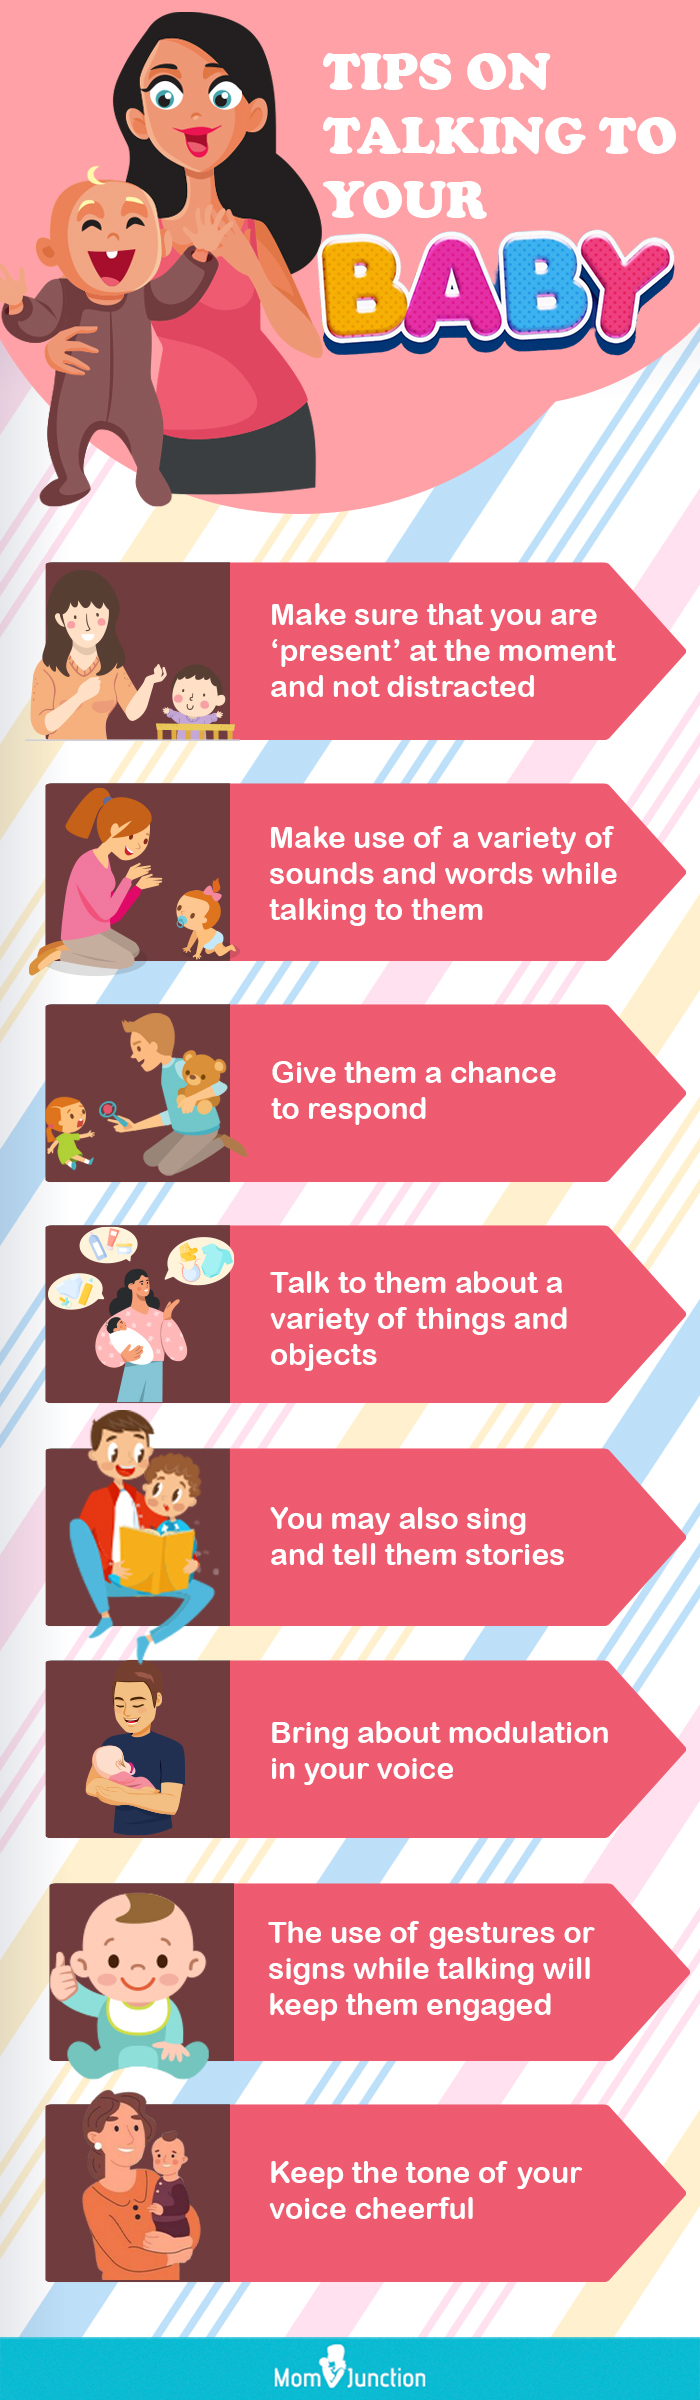 tips on talking to your baby (infographic)